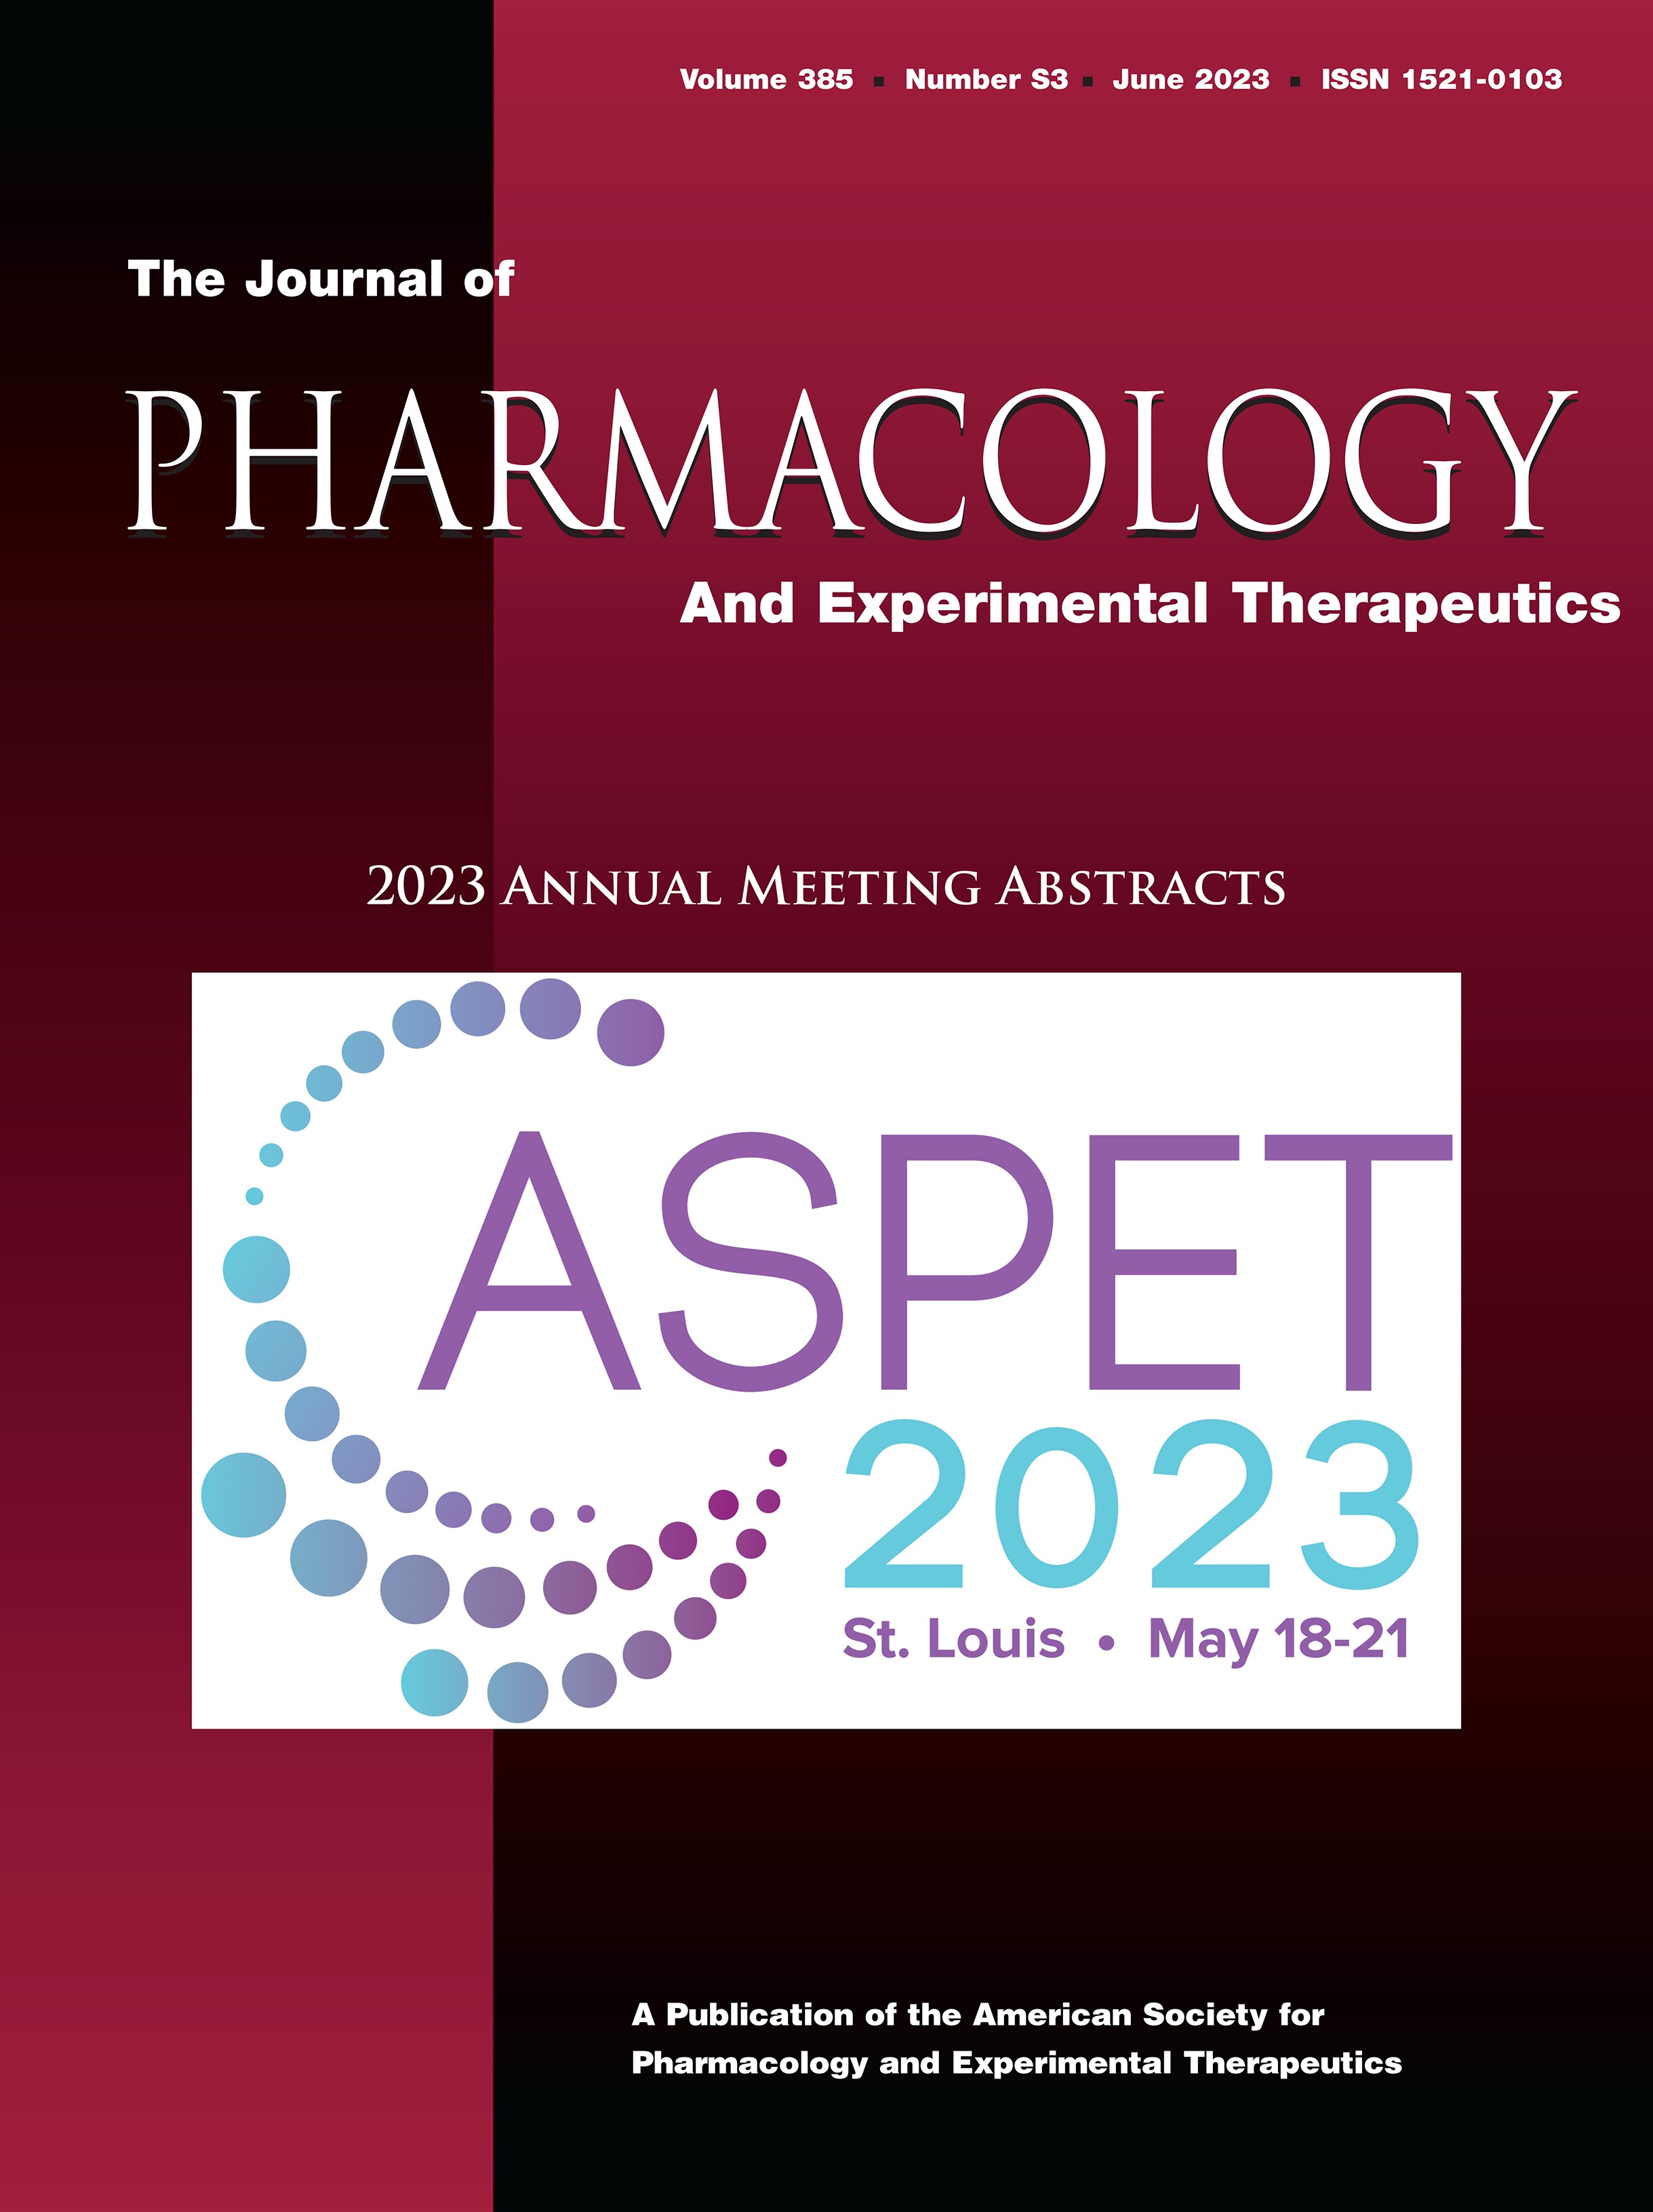 Identifying Students Causal Mechanistic Reasoning (CMR) in Medical Pharmacology [ASPET 2023 Annual Meeting Abstract - Pharmacology Education]